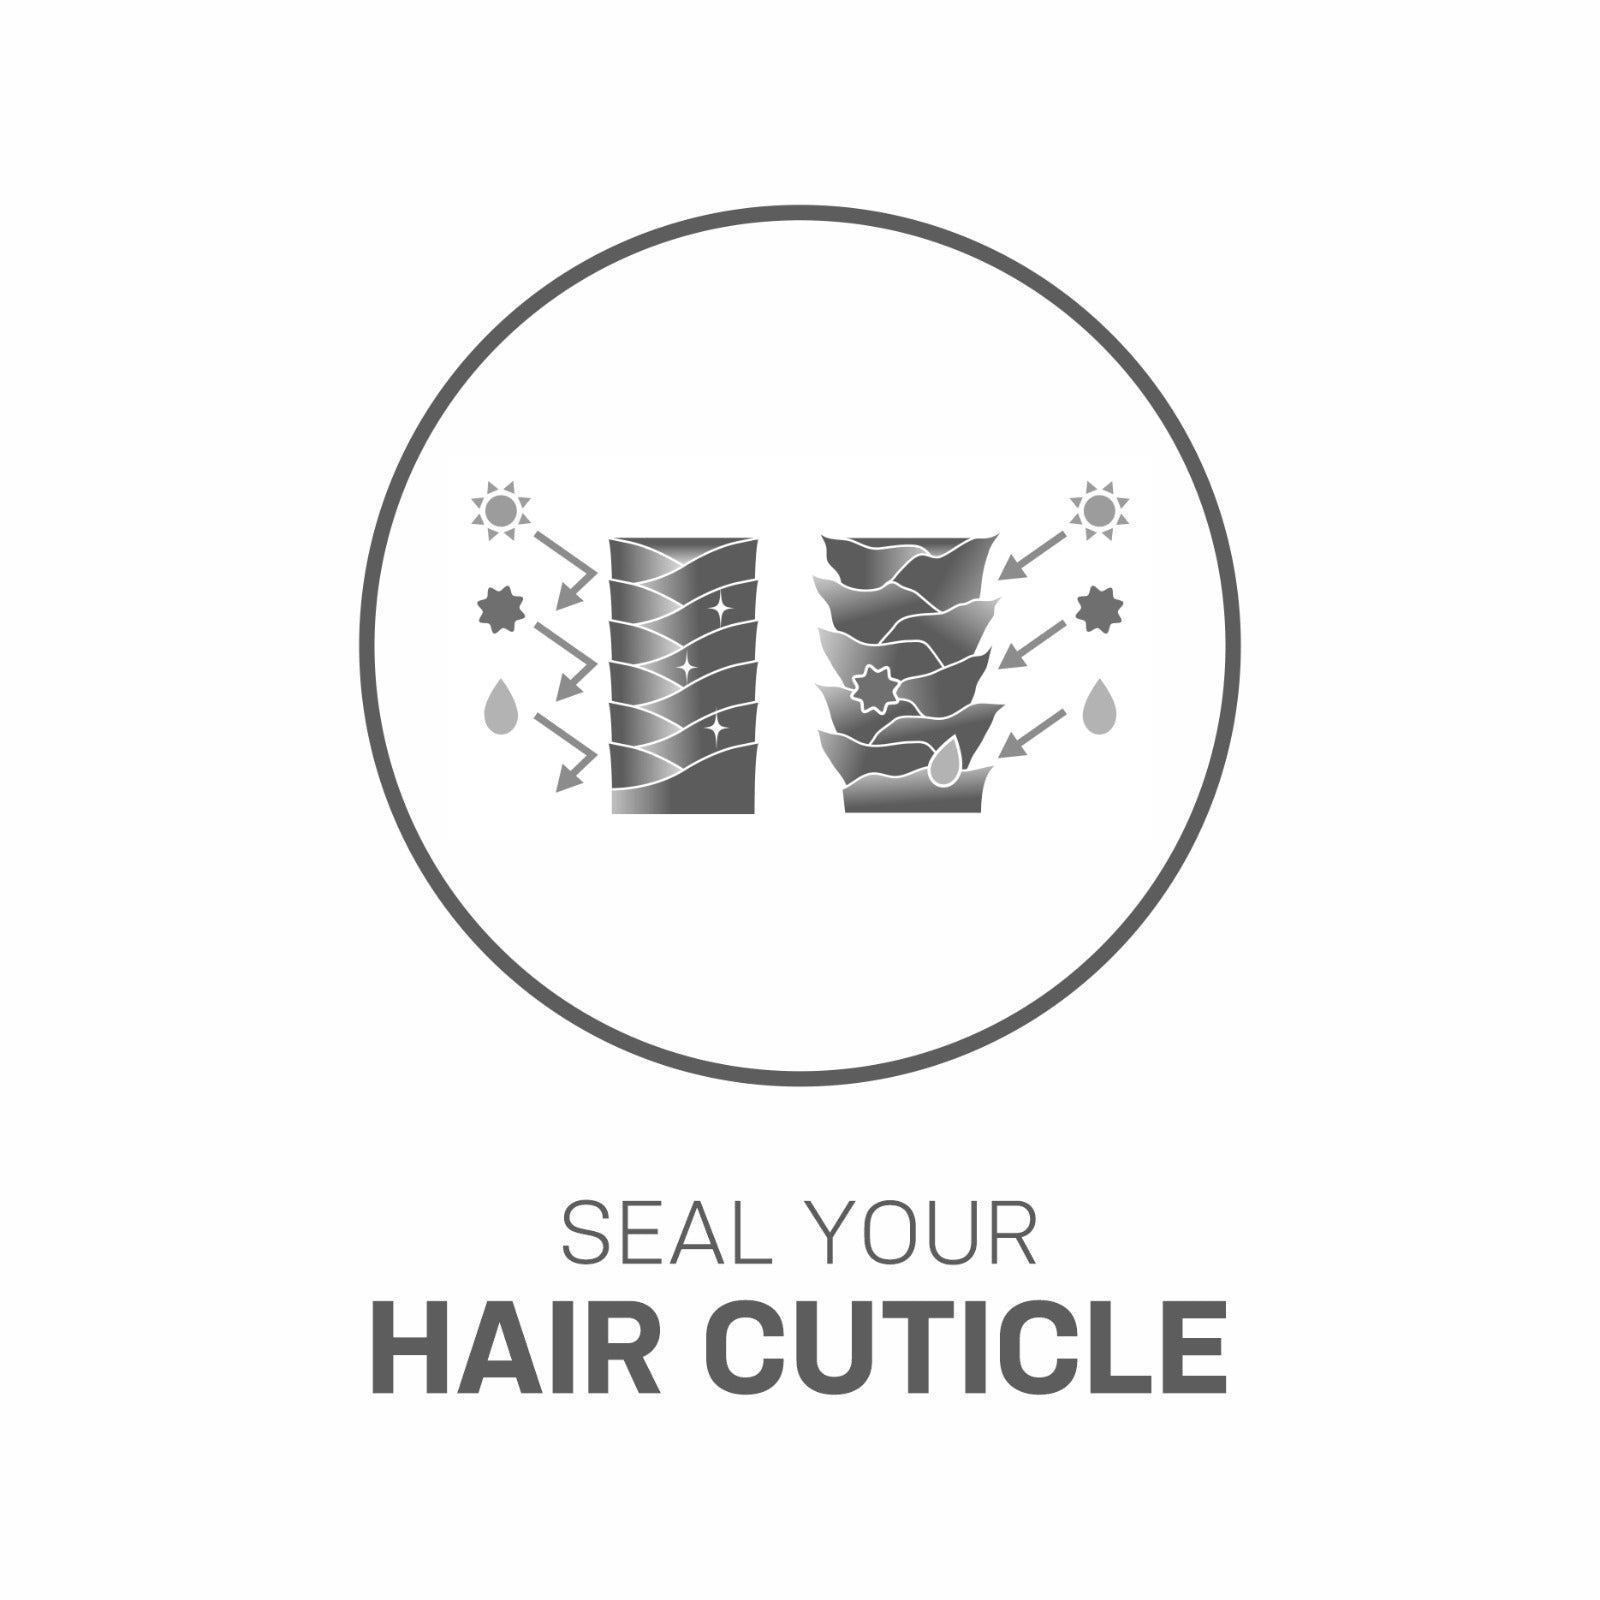 how to seal hair cuticle